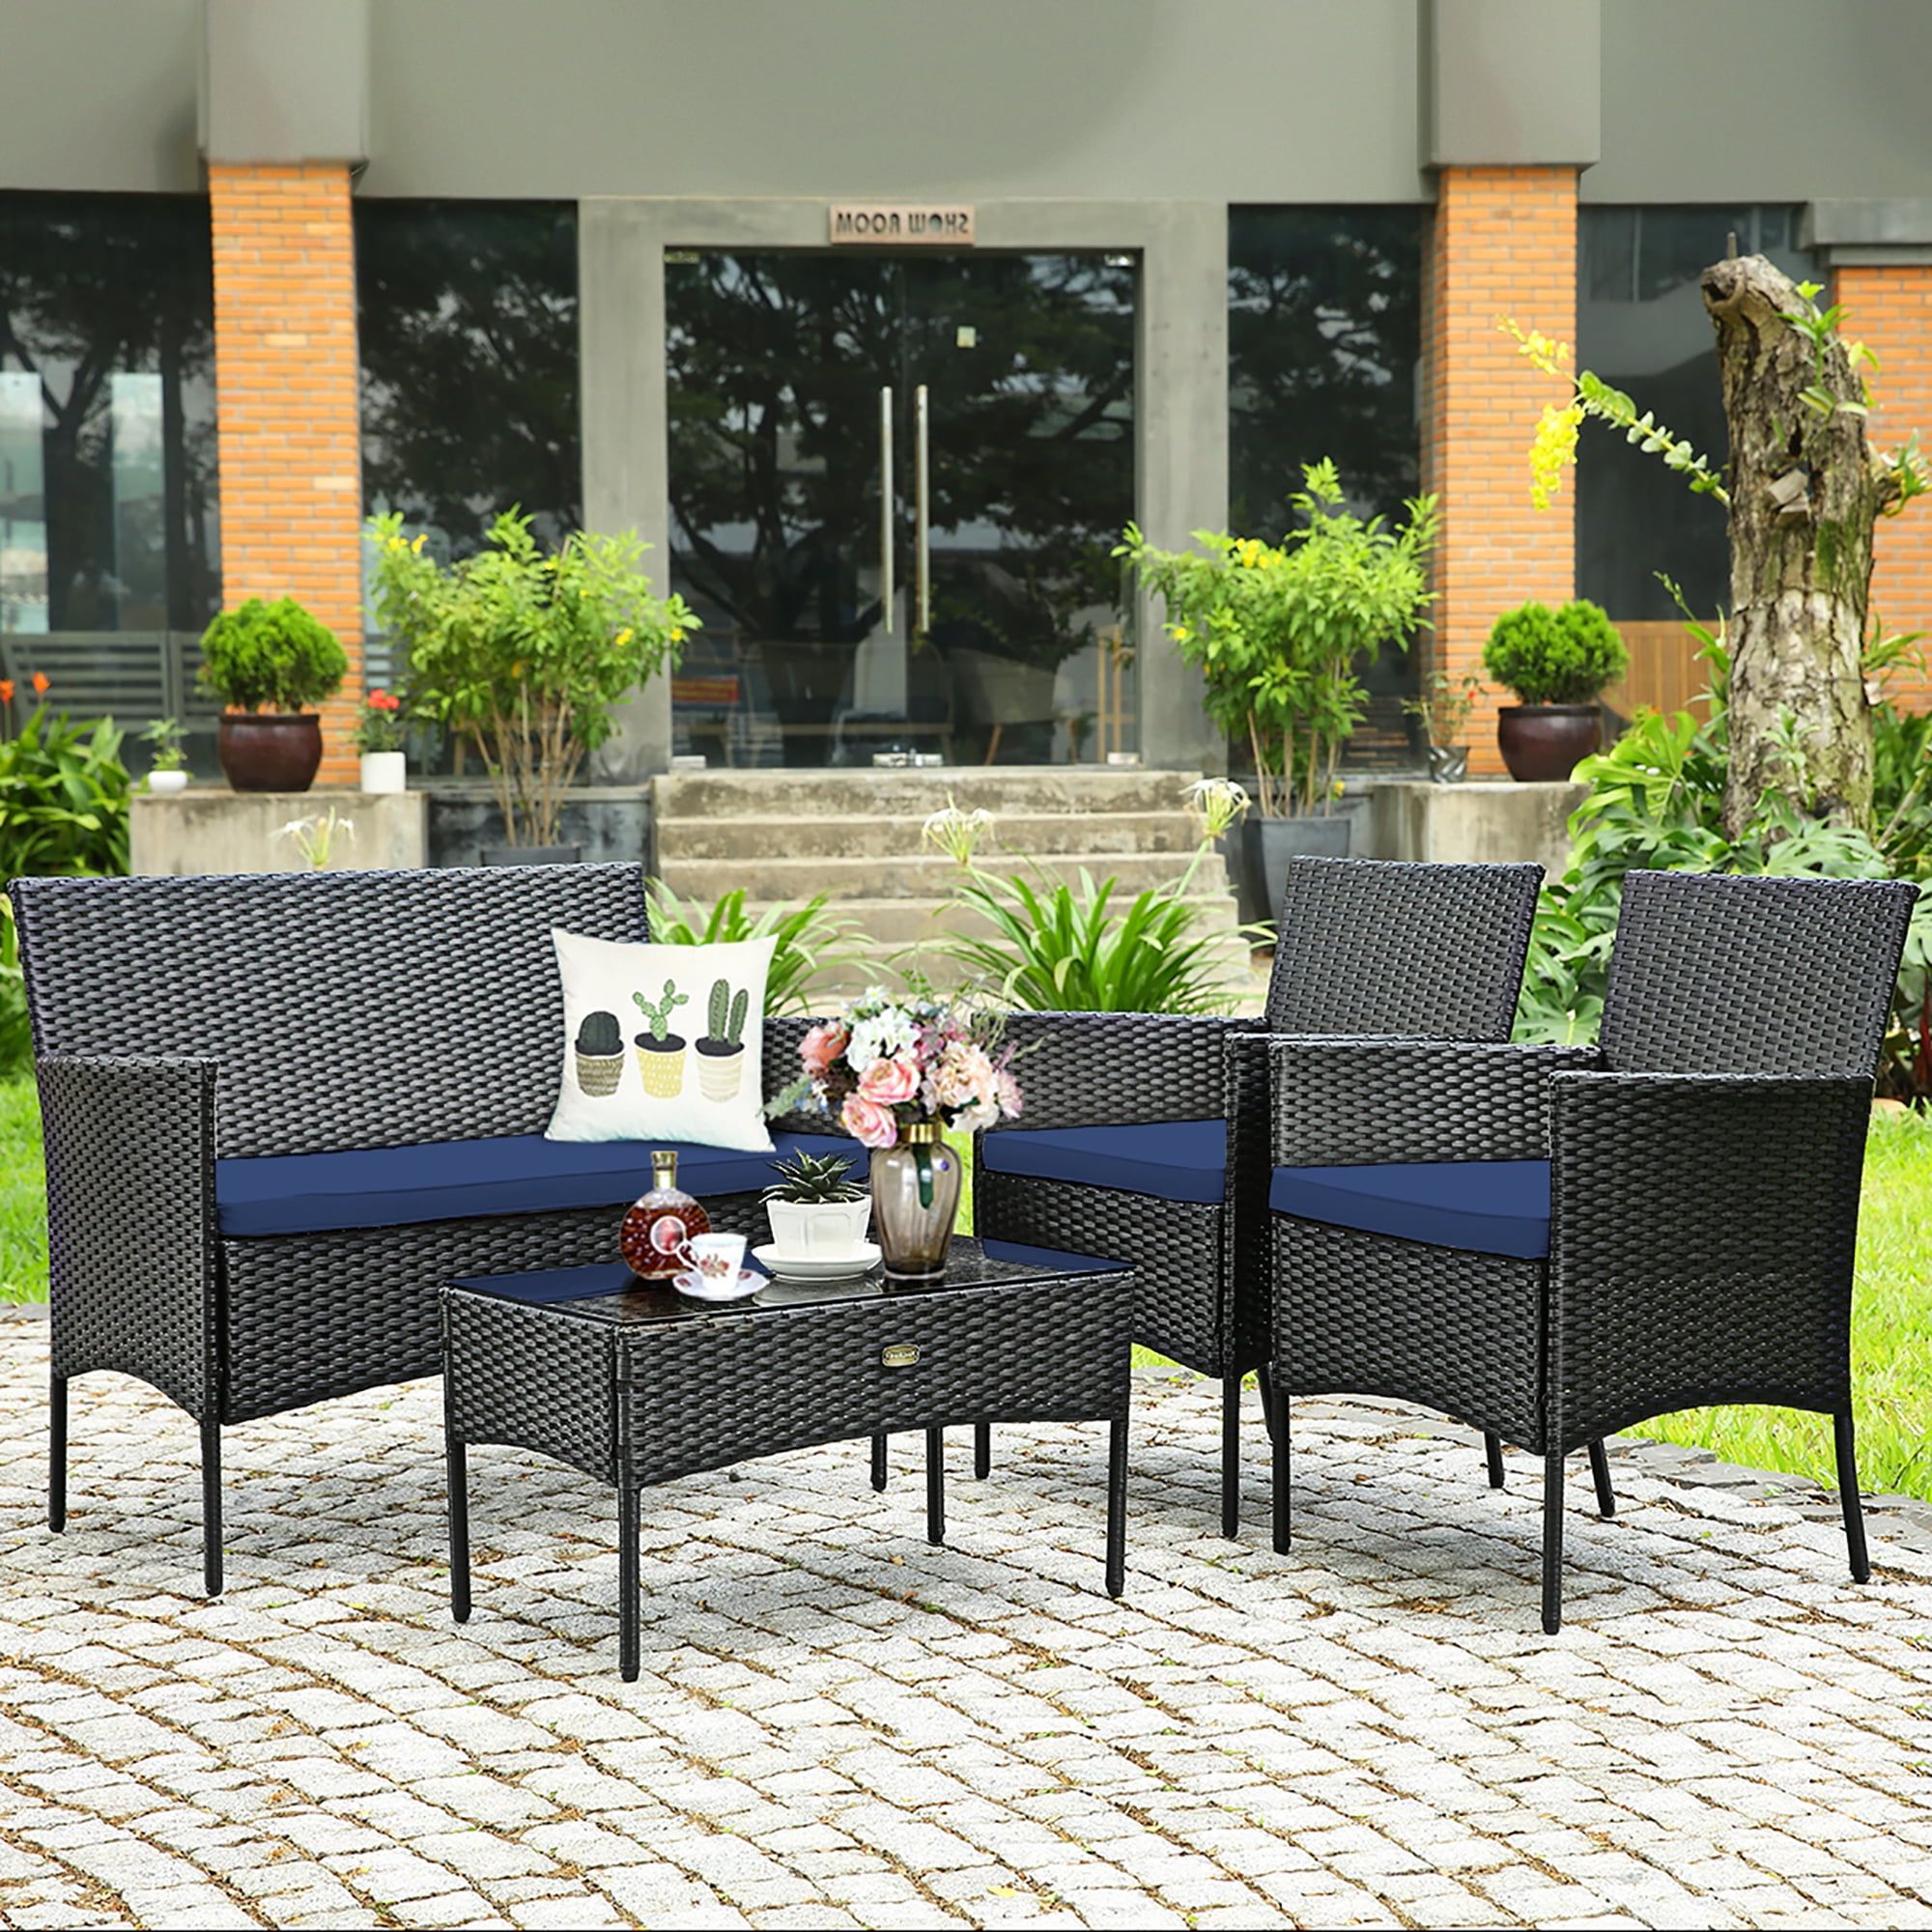 4pcs Rattan Patio Coffee Tables With Regard To Famous Costway 4pcs Patio Wicker Furniture Set Coffee Table Cushions W/off White &  Navy Cover – Walmart (View 6 of 10)